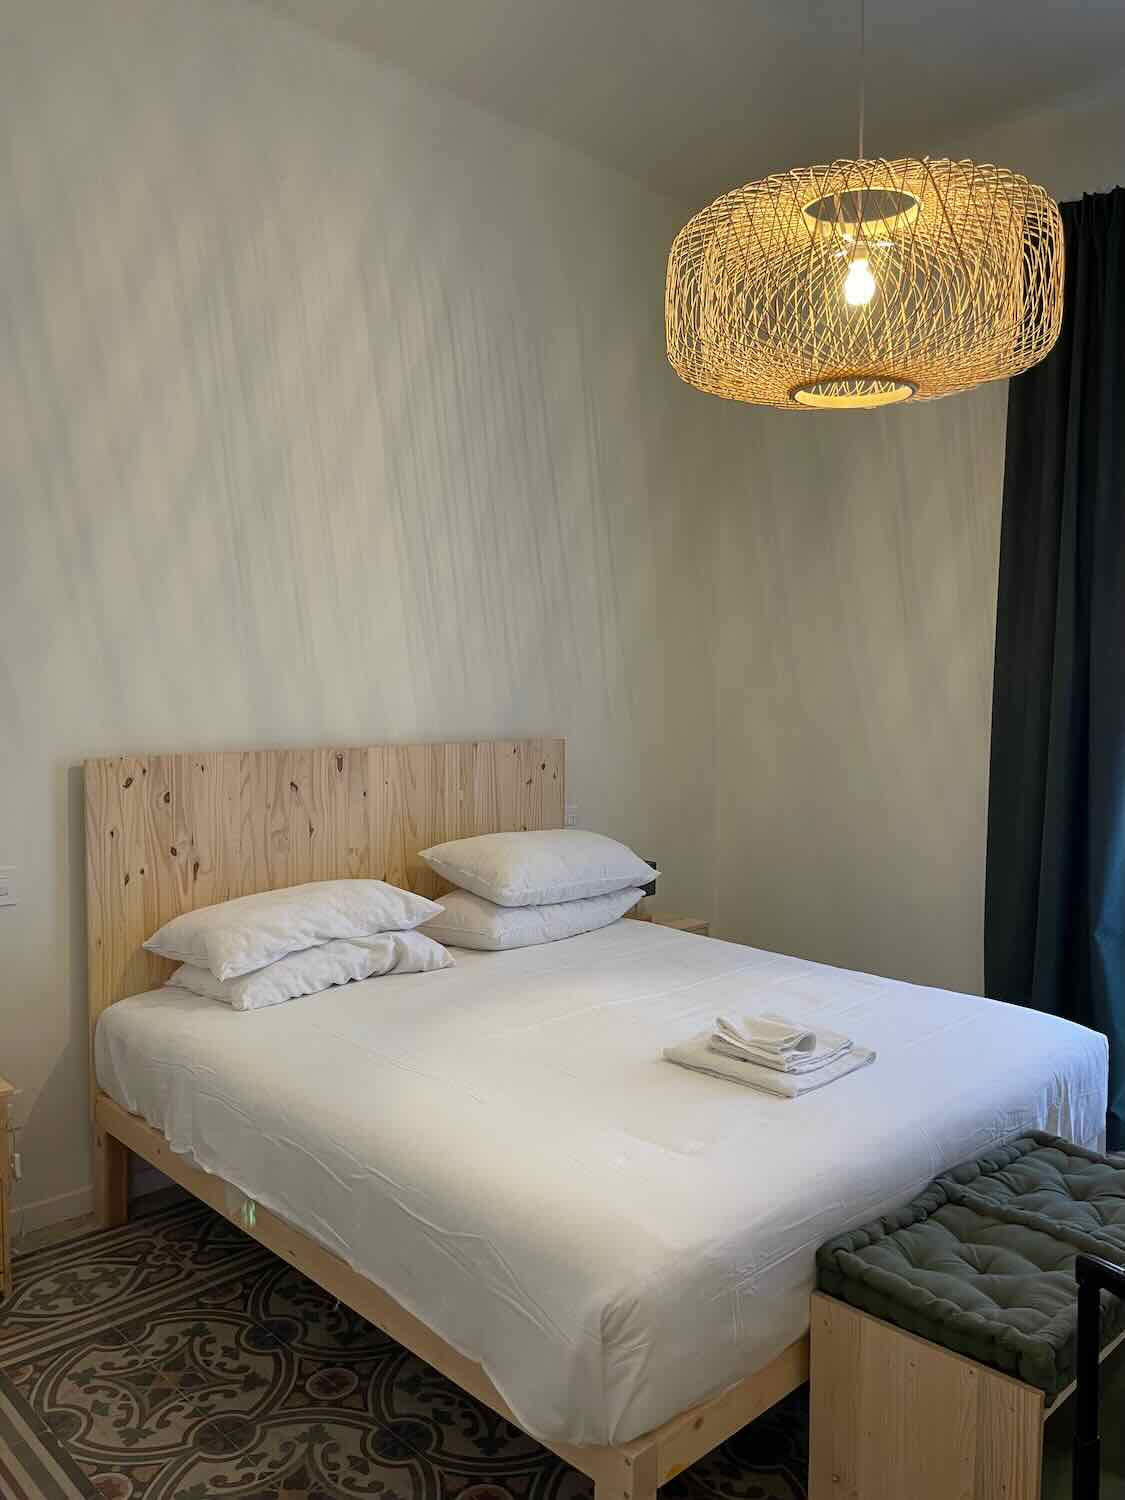 A neatly made bed with white linens in a room at Lostabile Hotel in Bari, Italy. The room has a minimalist design with a woven light fixture hanging from the ceiling and patterned floor tiles.